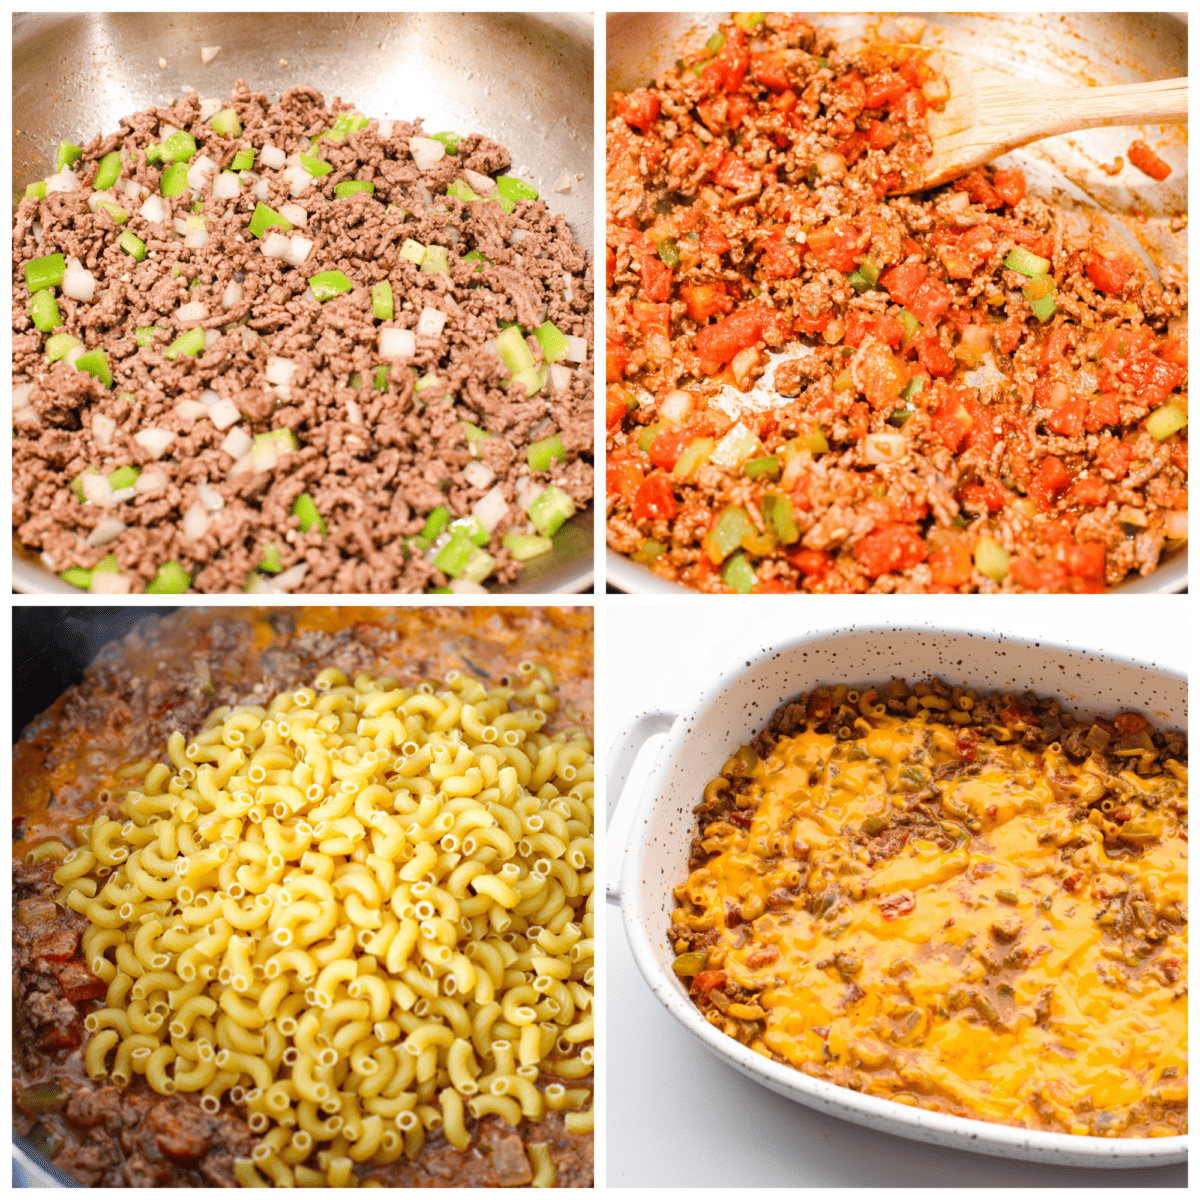 4-photo collage of the ground beef being browned and then combined with veggies, pasta, and cheese.